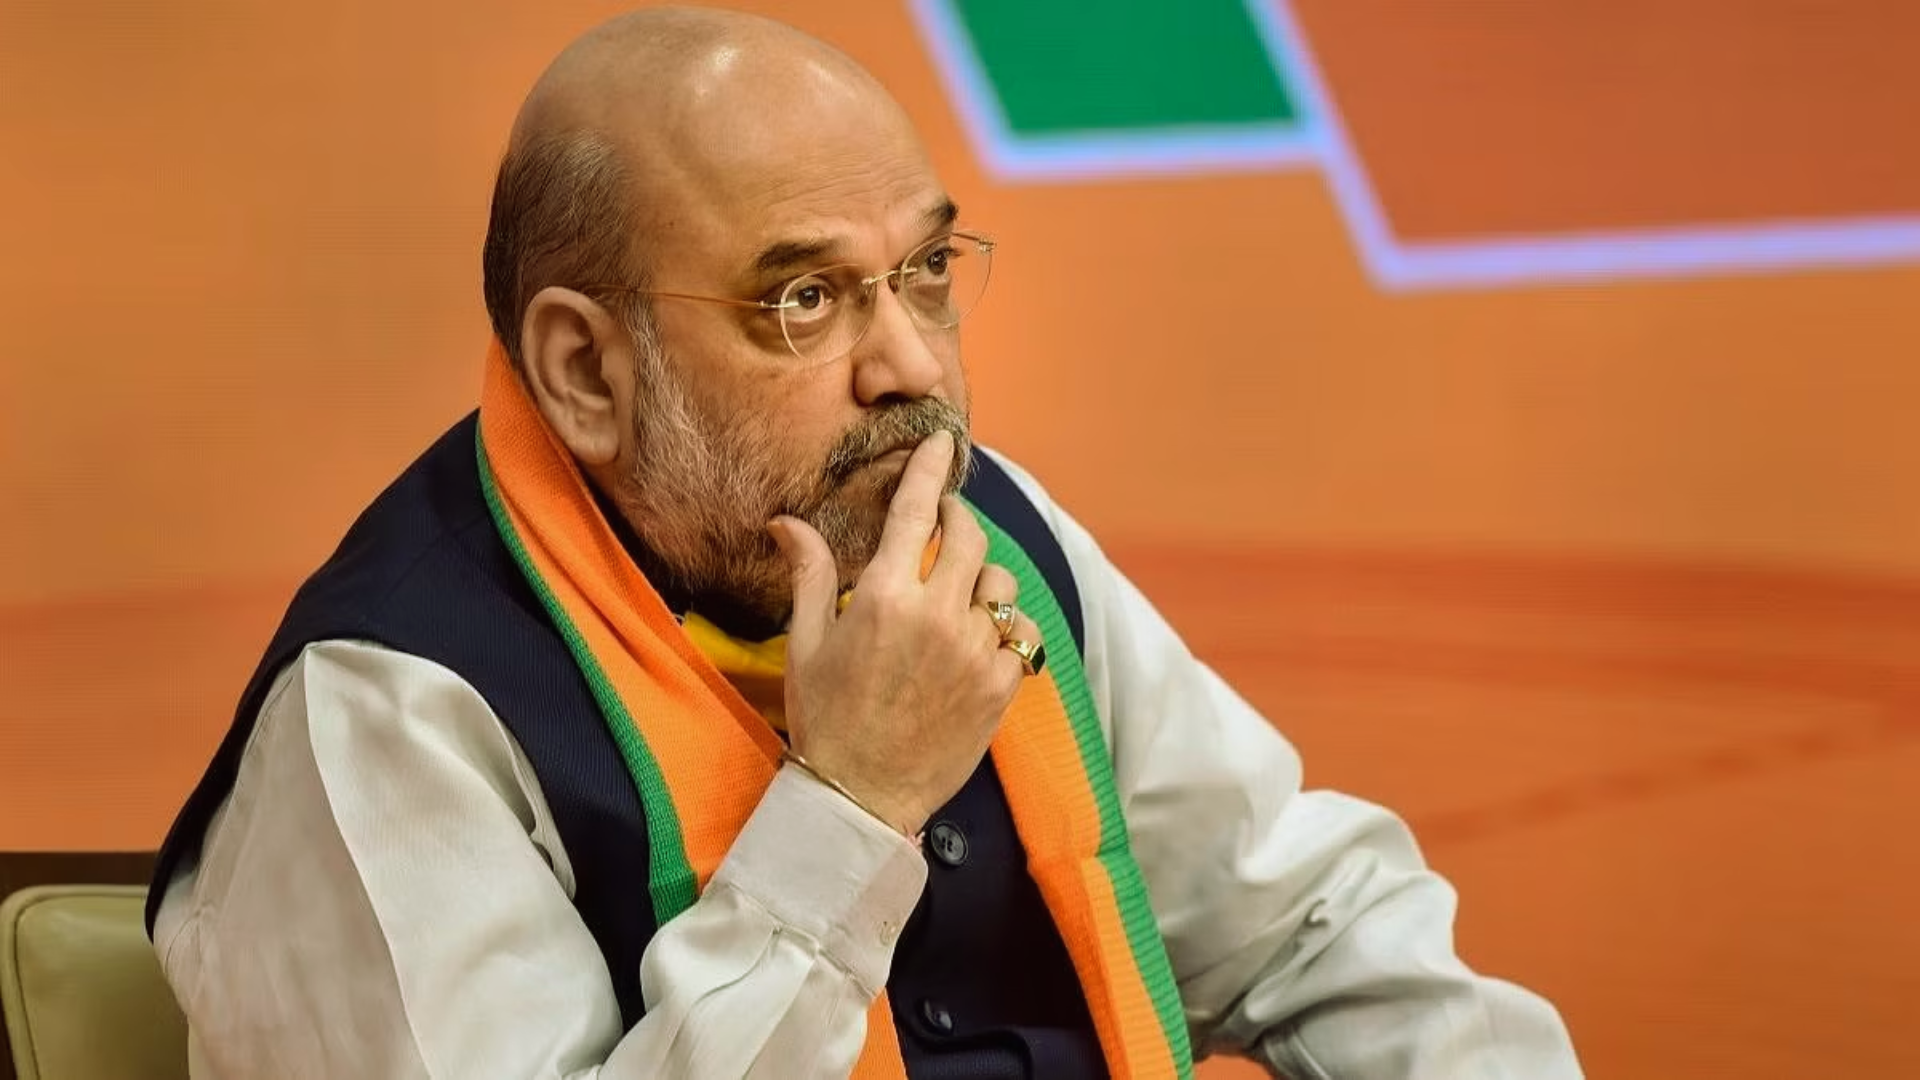 FIR Filed Over Doctored Video Of Amit Shah On Reservation